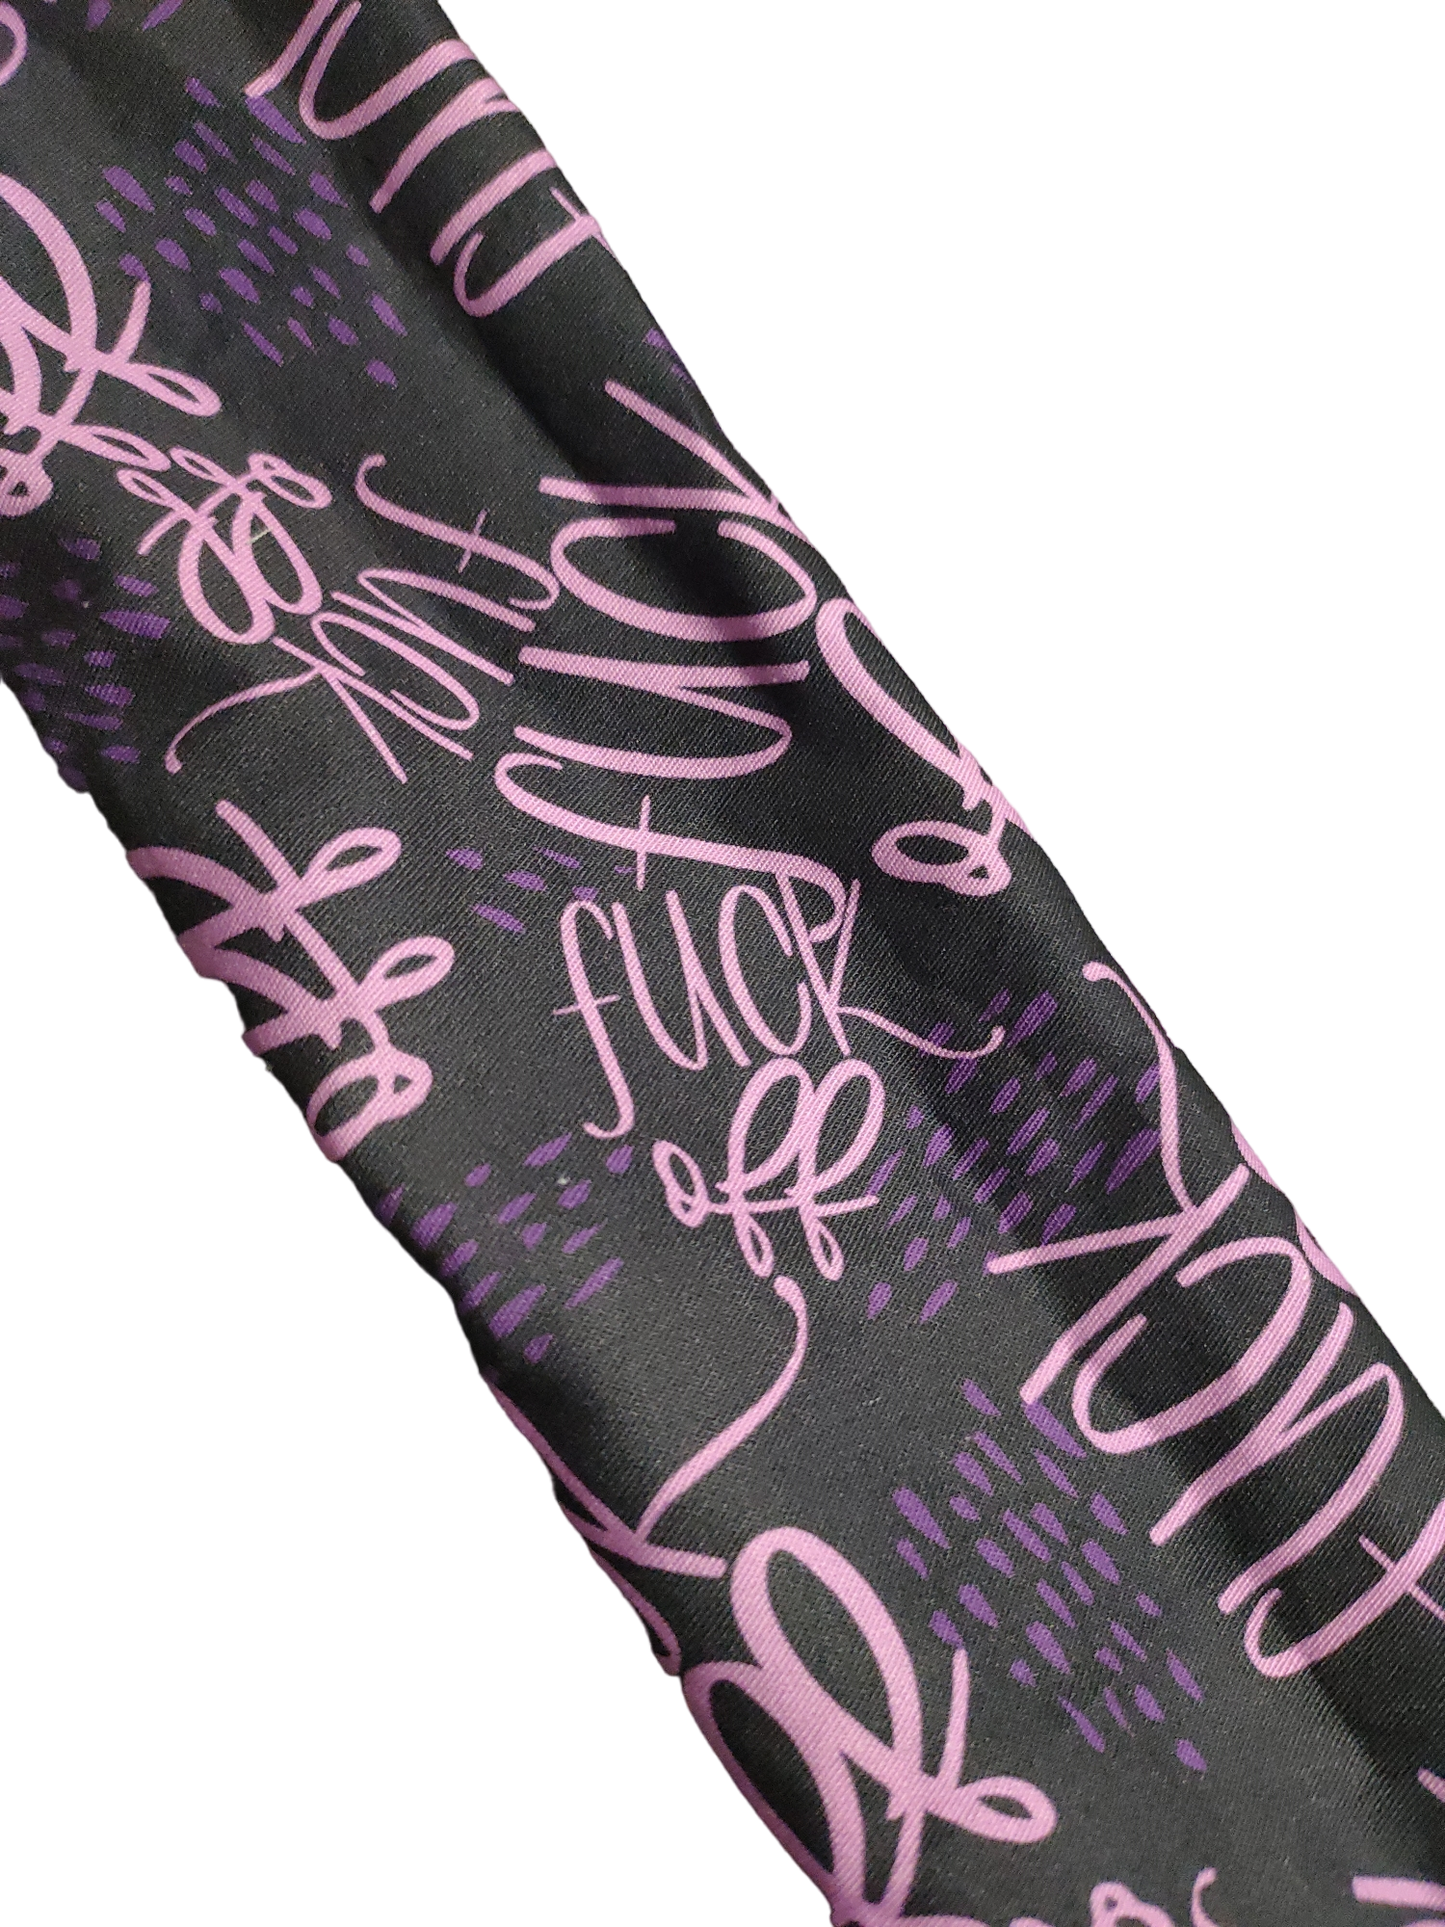 BETTY BOO BANDS™ WIRED HEADWRAP | 18+ Swear Band | F*#k Off